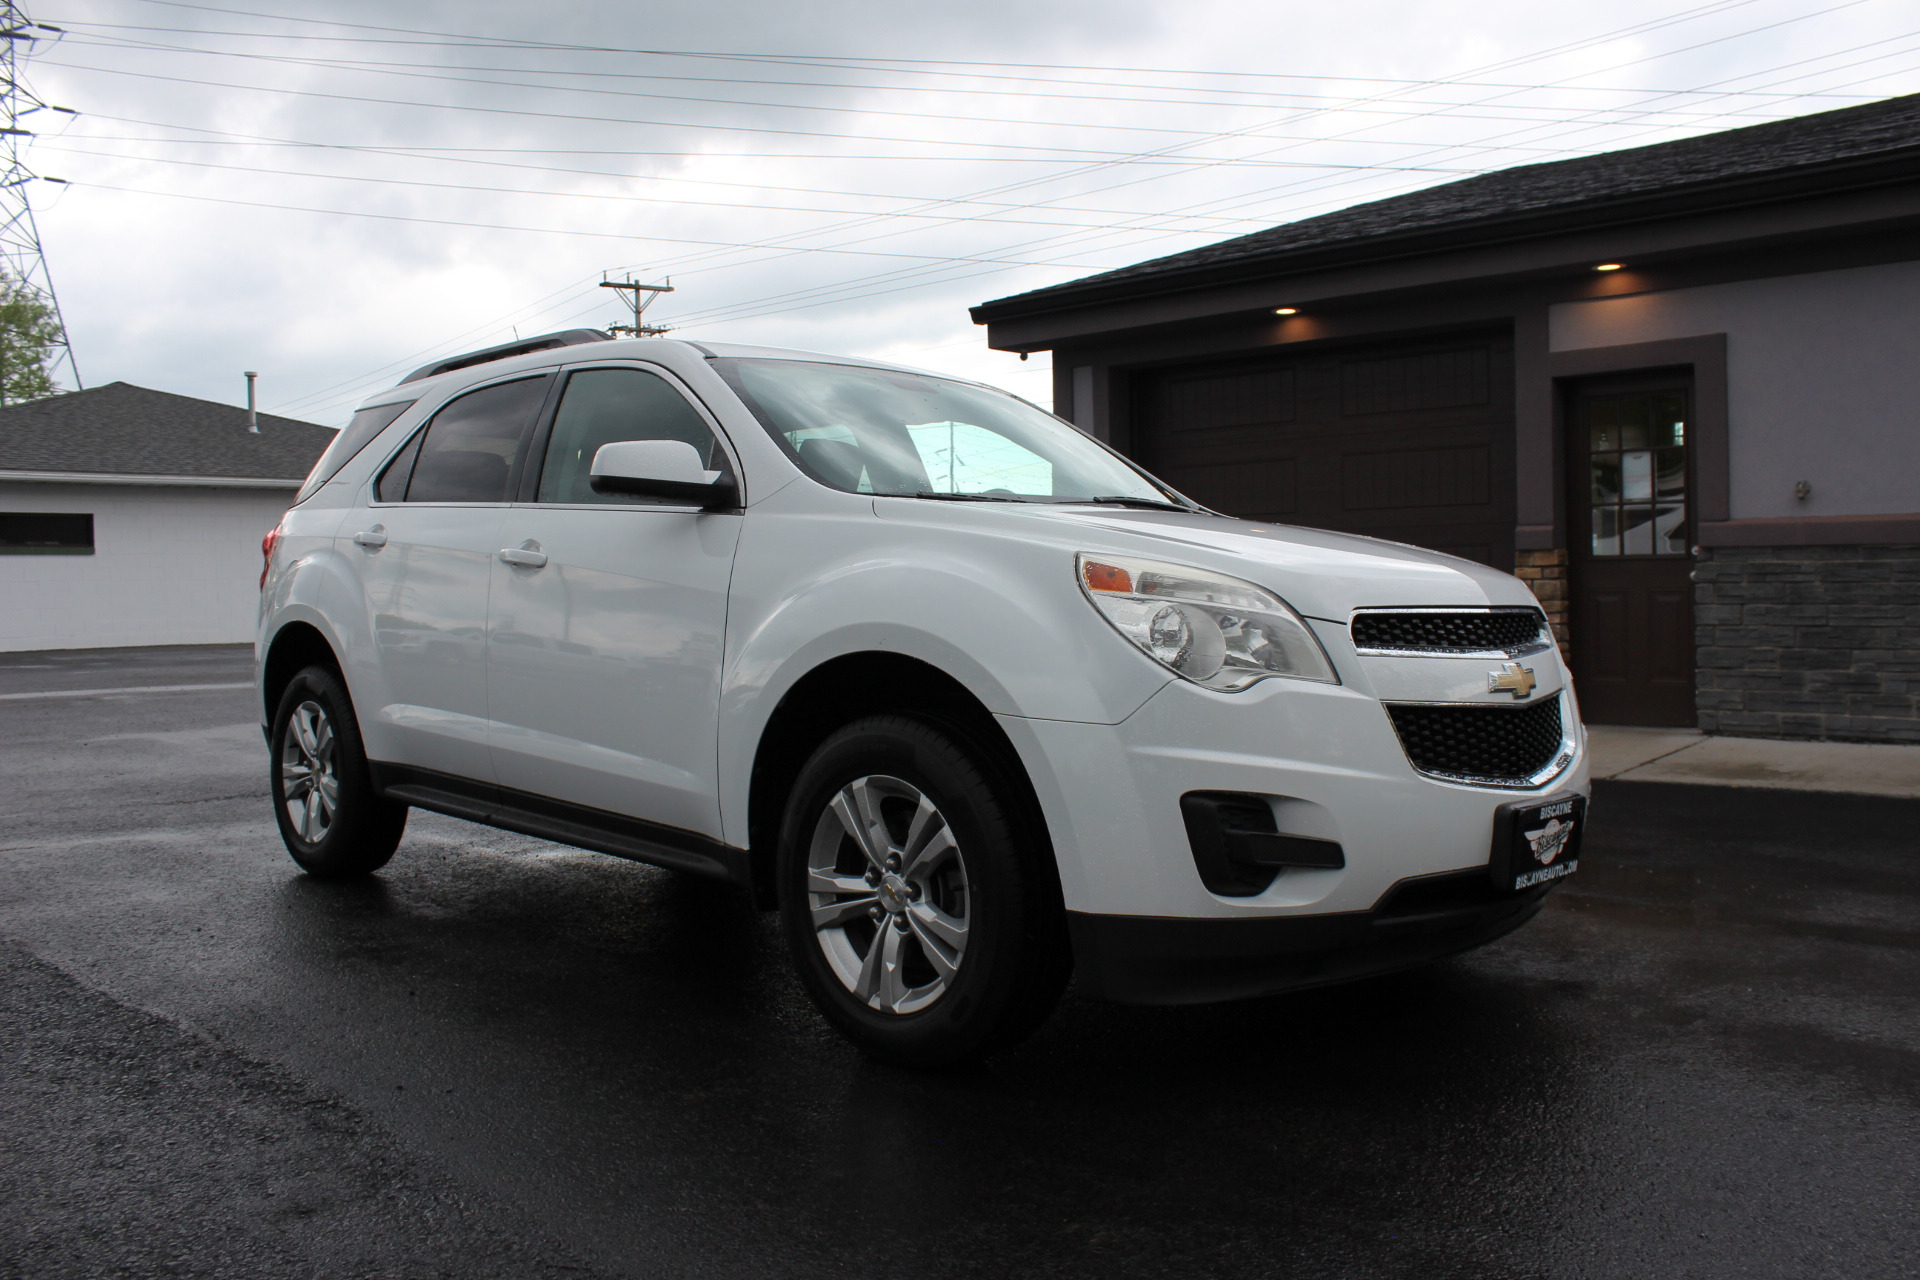 2011 Chevrolet Equinox Lt Biscayne Auto Sales Pre Owned Dealership